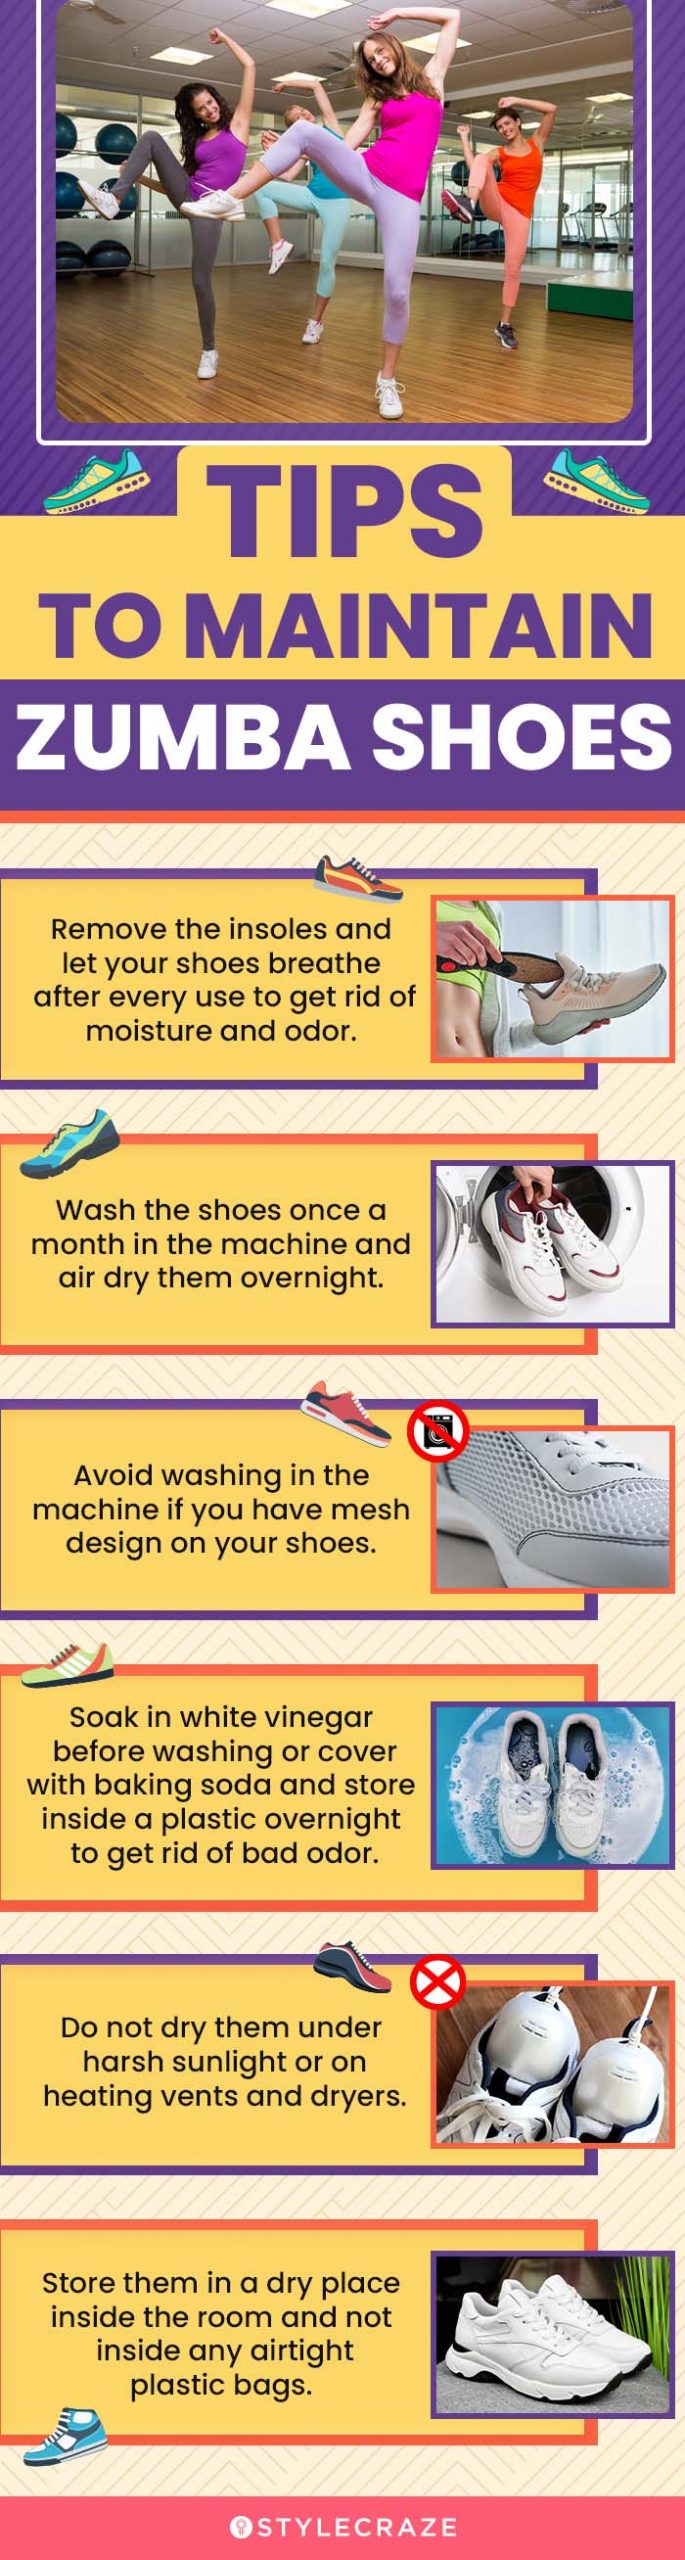 Tips To Maintain Zumba Shoes (infographic)